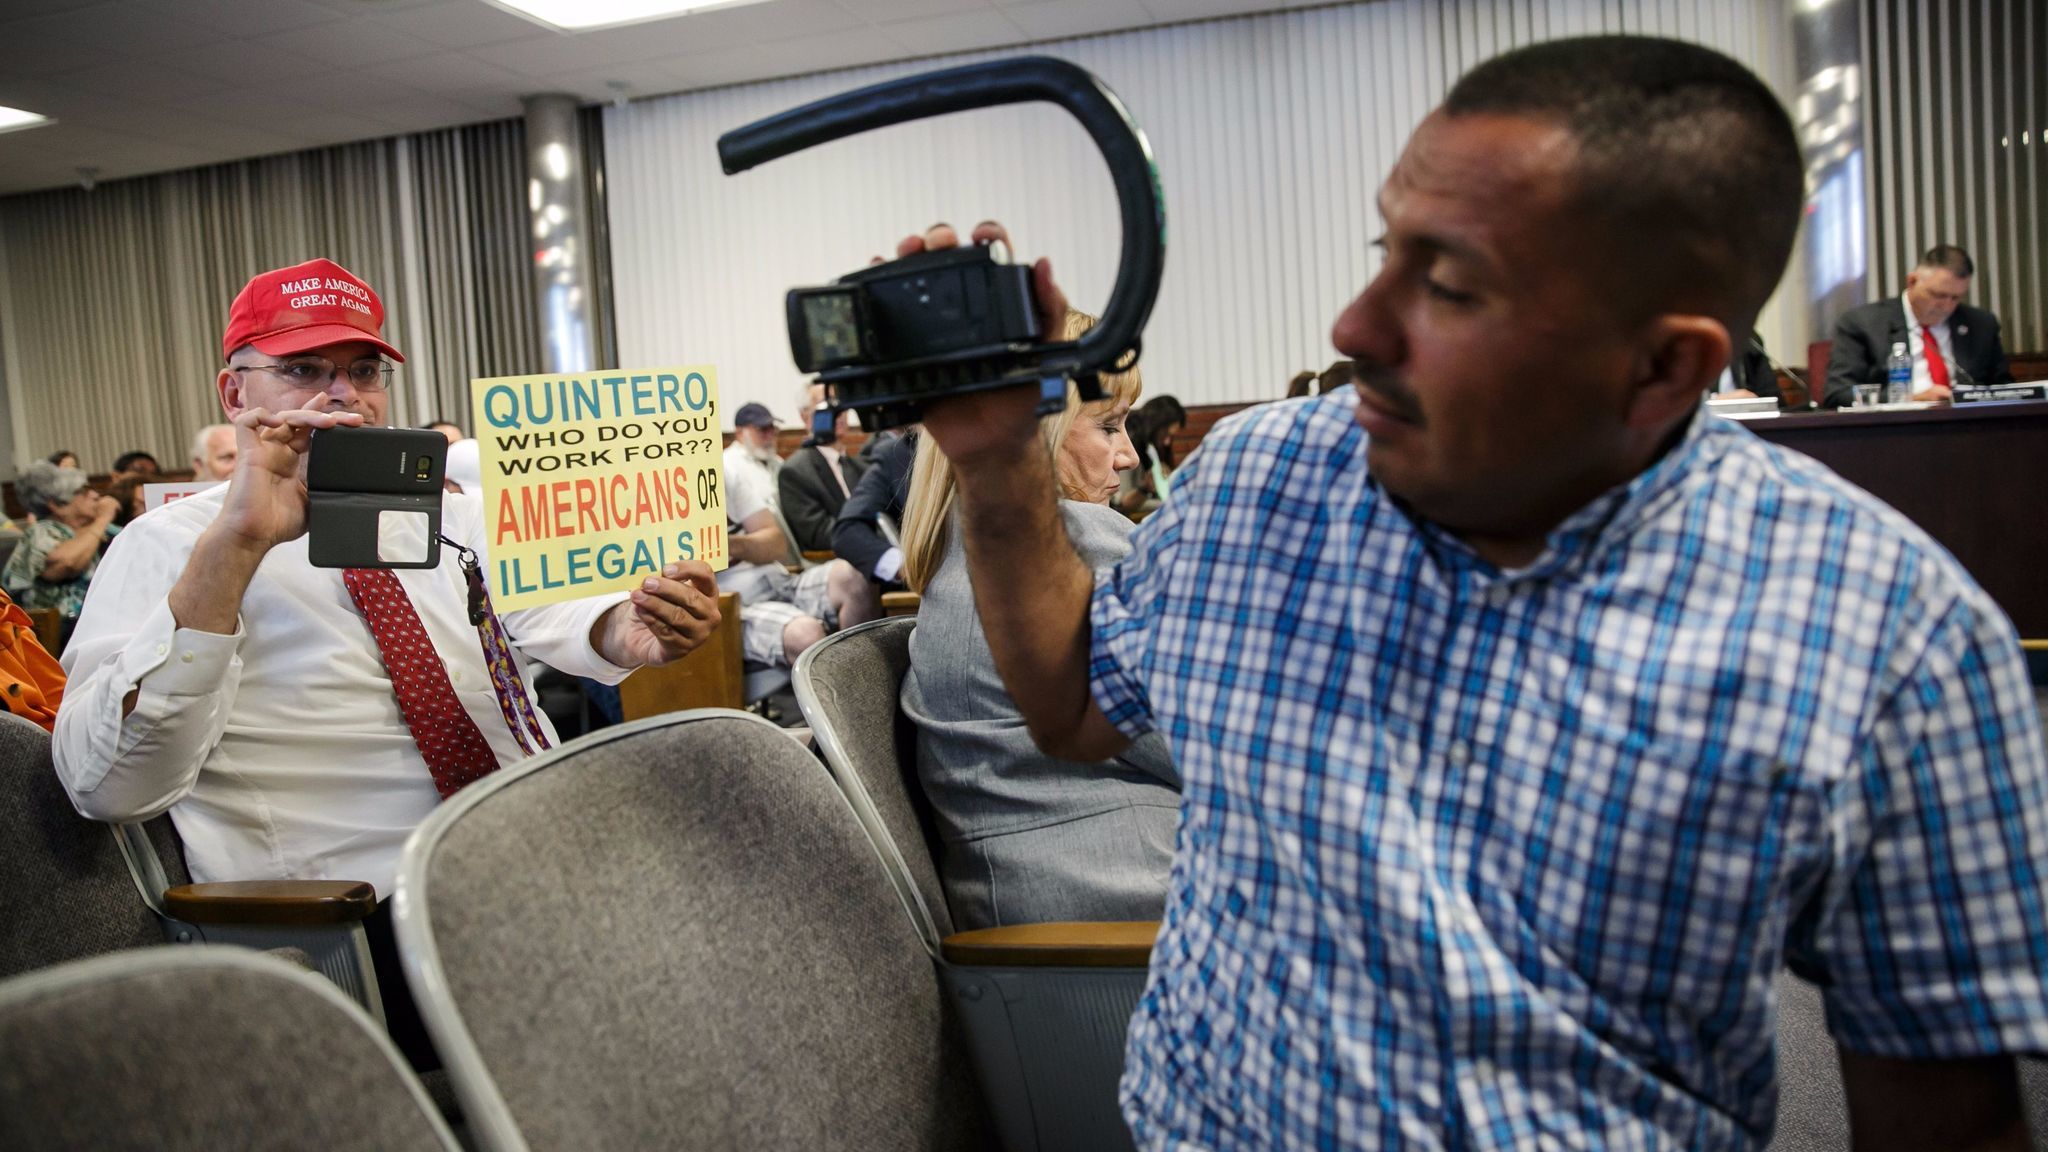 Schaper and immigrants' rights activist Naui Huitzilopochtli point their cameras at each other. Huitzilopochtli, of Santa Ana, often shows up at events specifically to record Schaper and other anti-illegal immigrant activists.